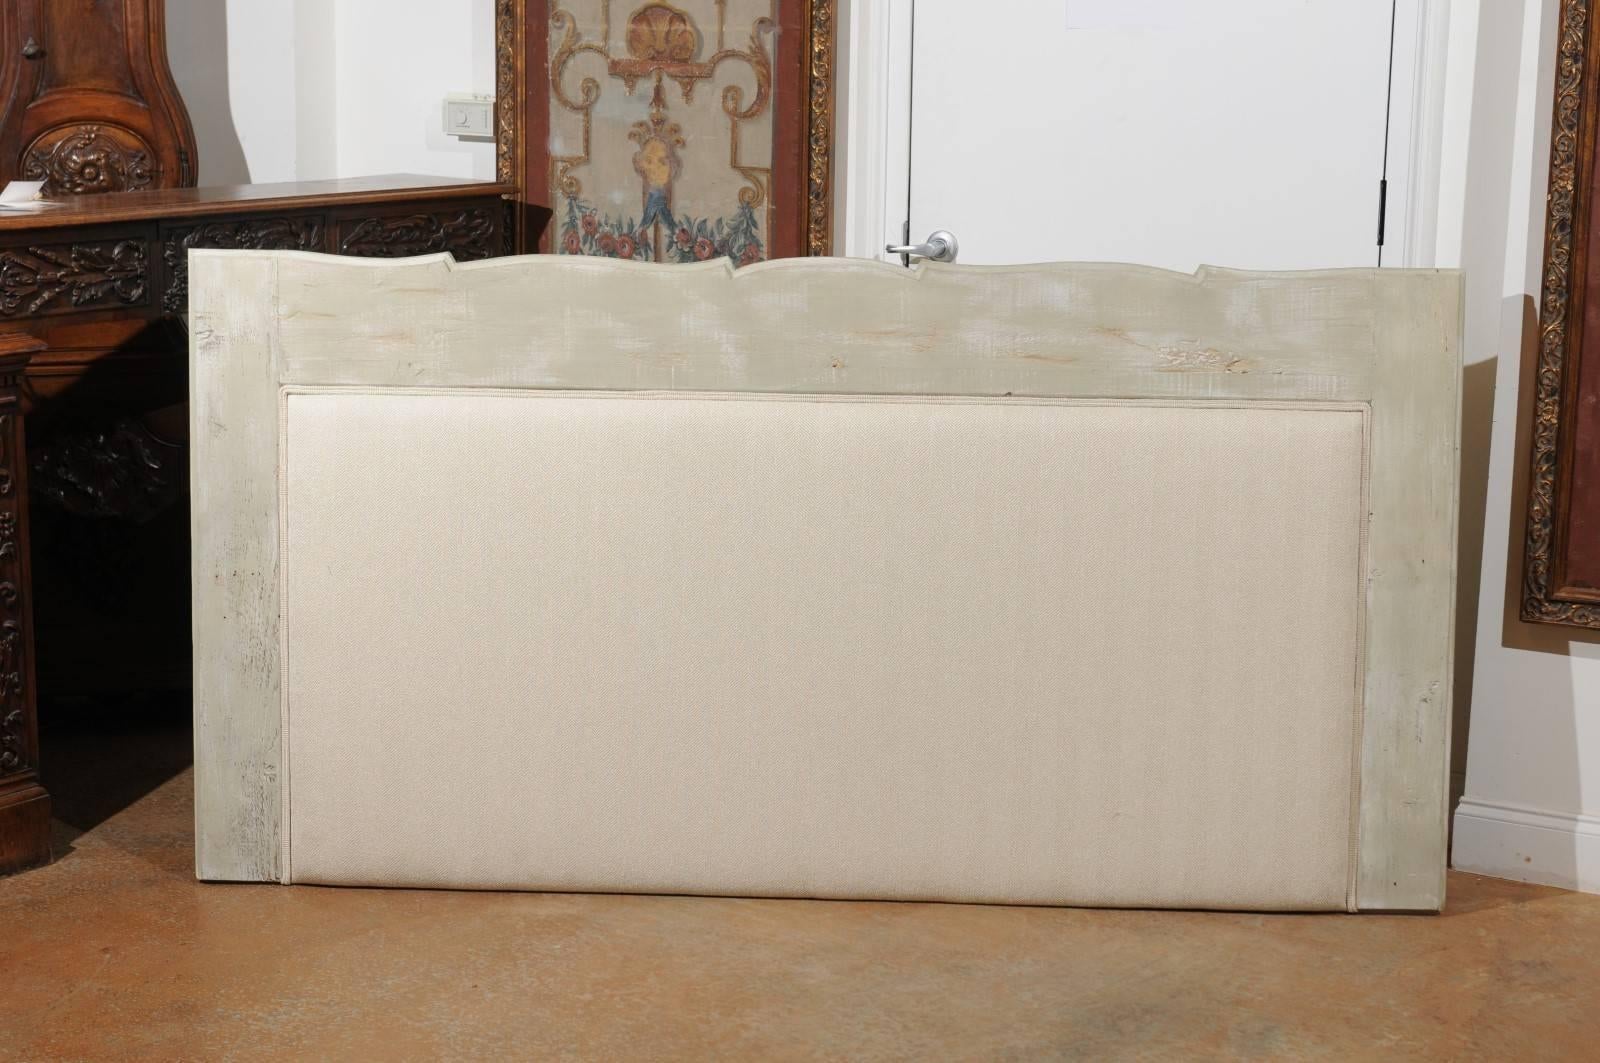 A painted wood upholstered headboard perfect for a king-size bed, made from the shelf of an antique French bookcase. This headboard features a light grey / green painted wooden frame, topped with a delicately carved upper rail with serpentine lines.